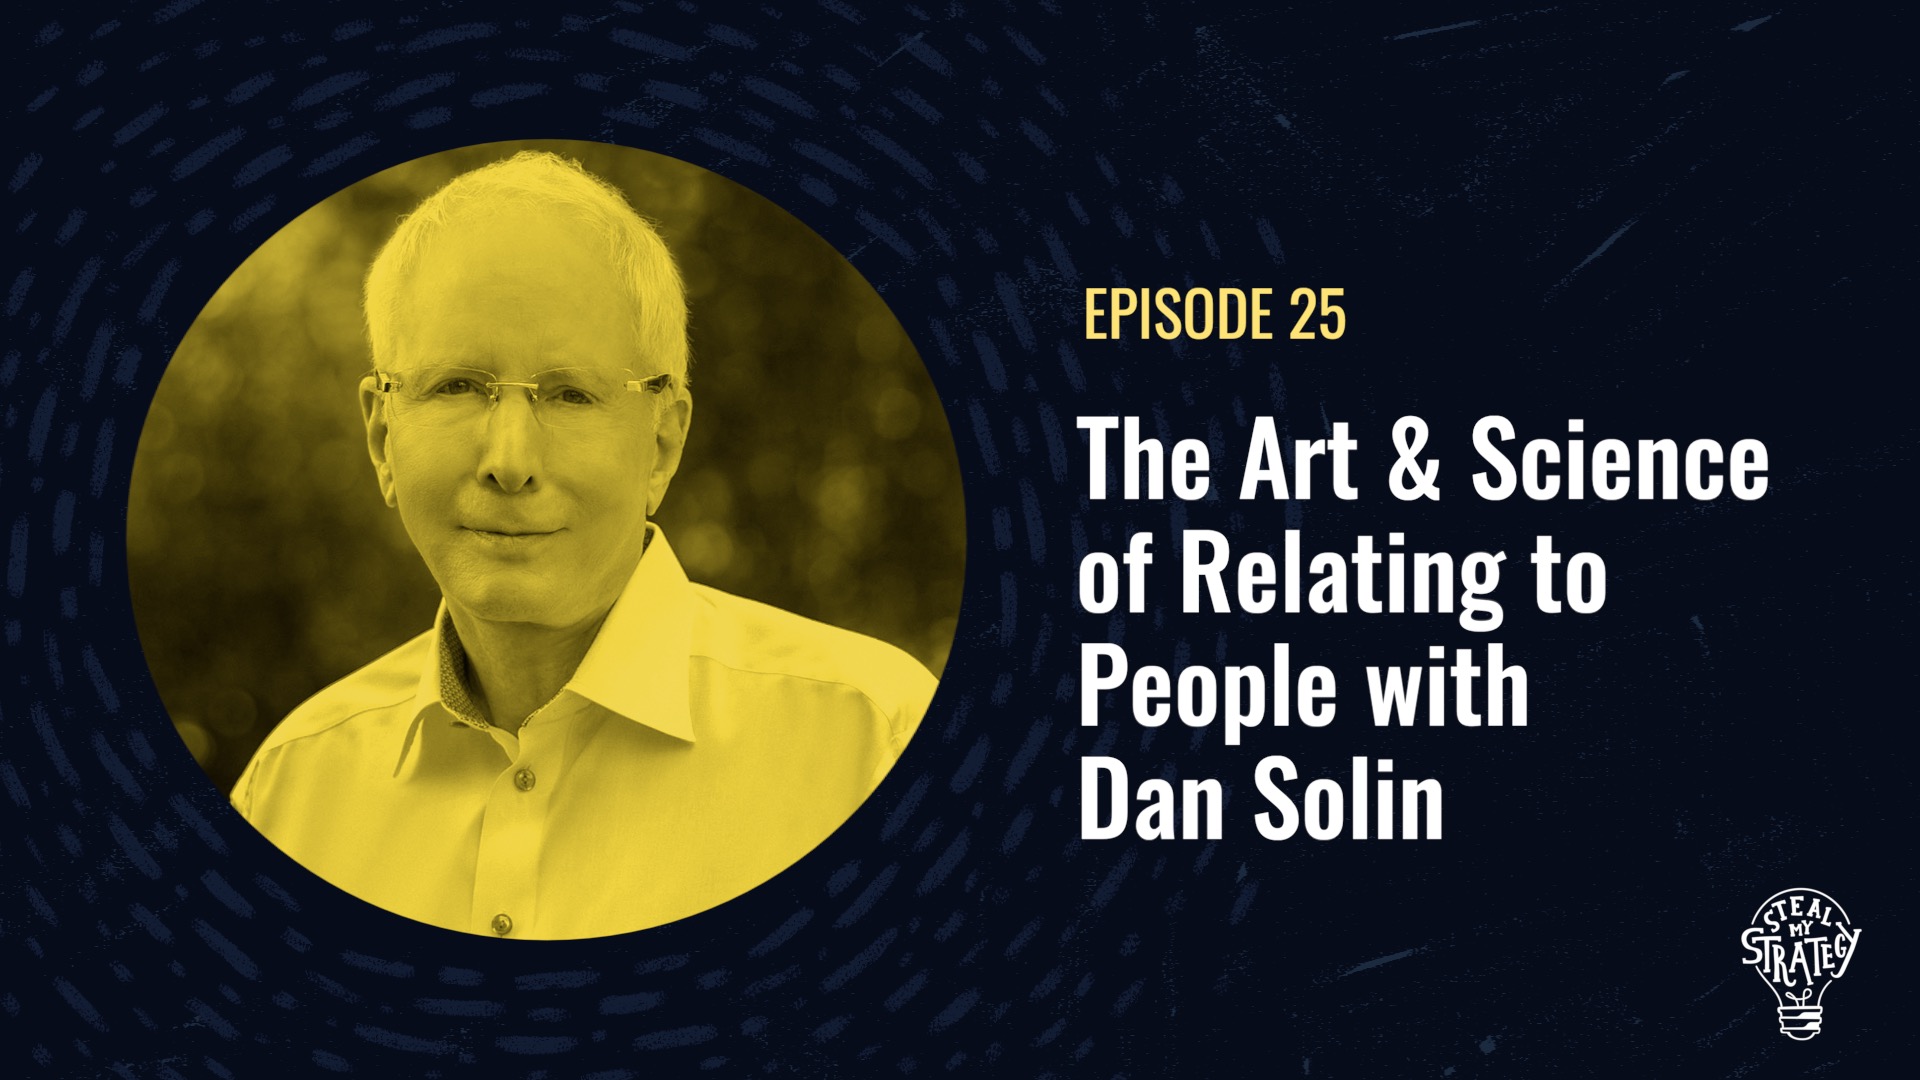 [Podcast] Steal My Strategy: The Art and Science of Relating to People with Dan Solin